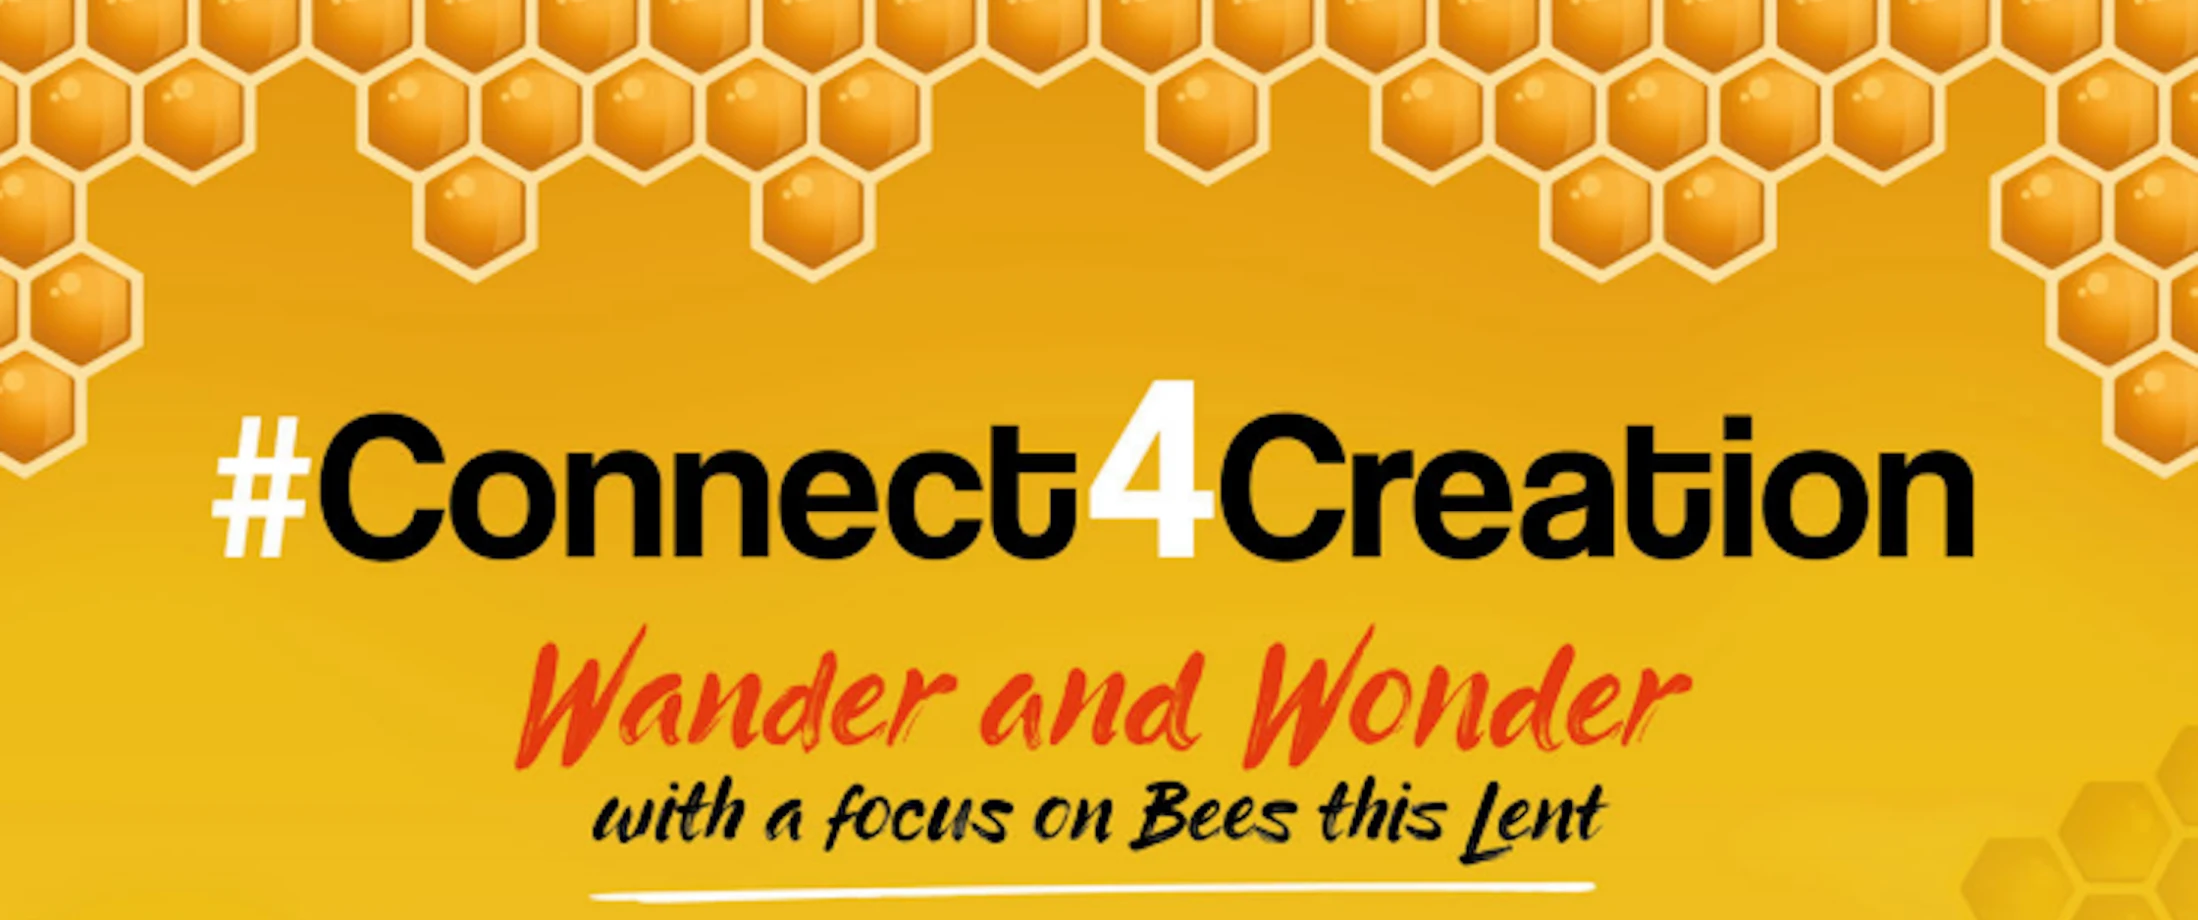 Wander and wonder #Connect4Creation